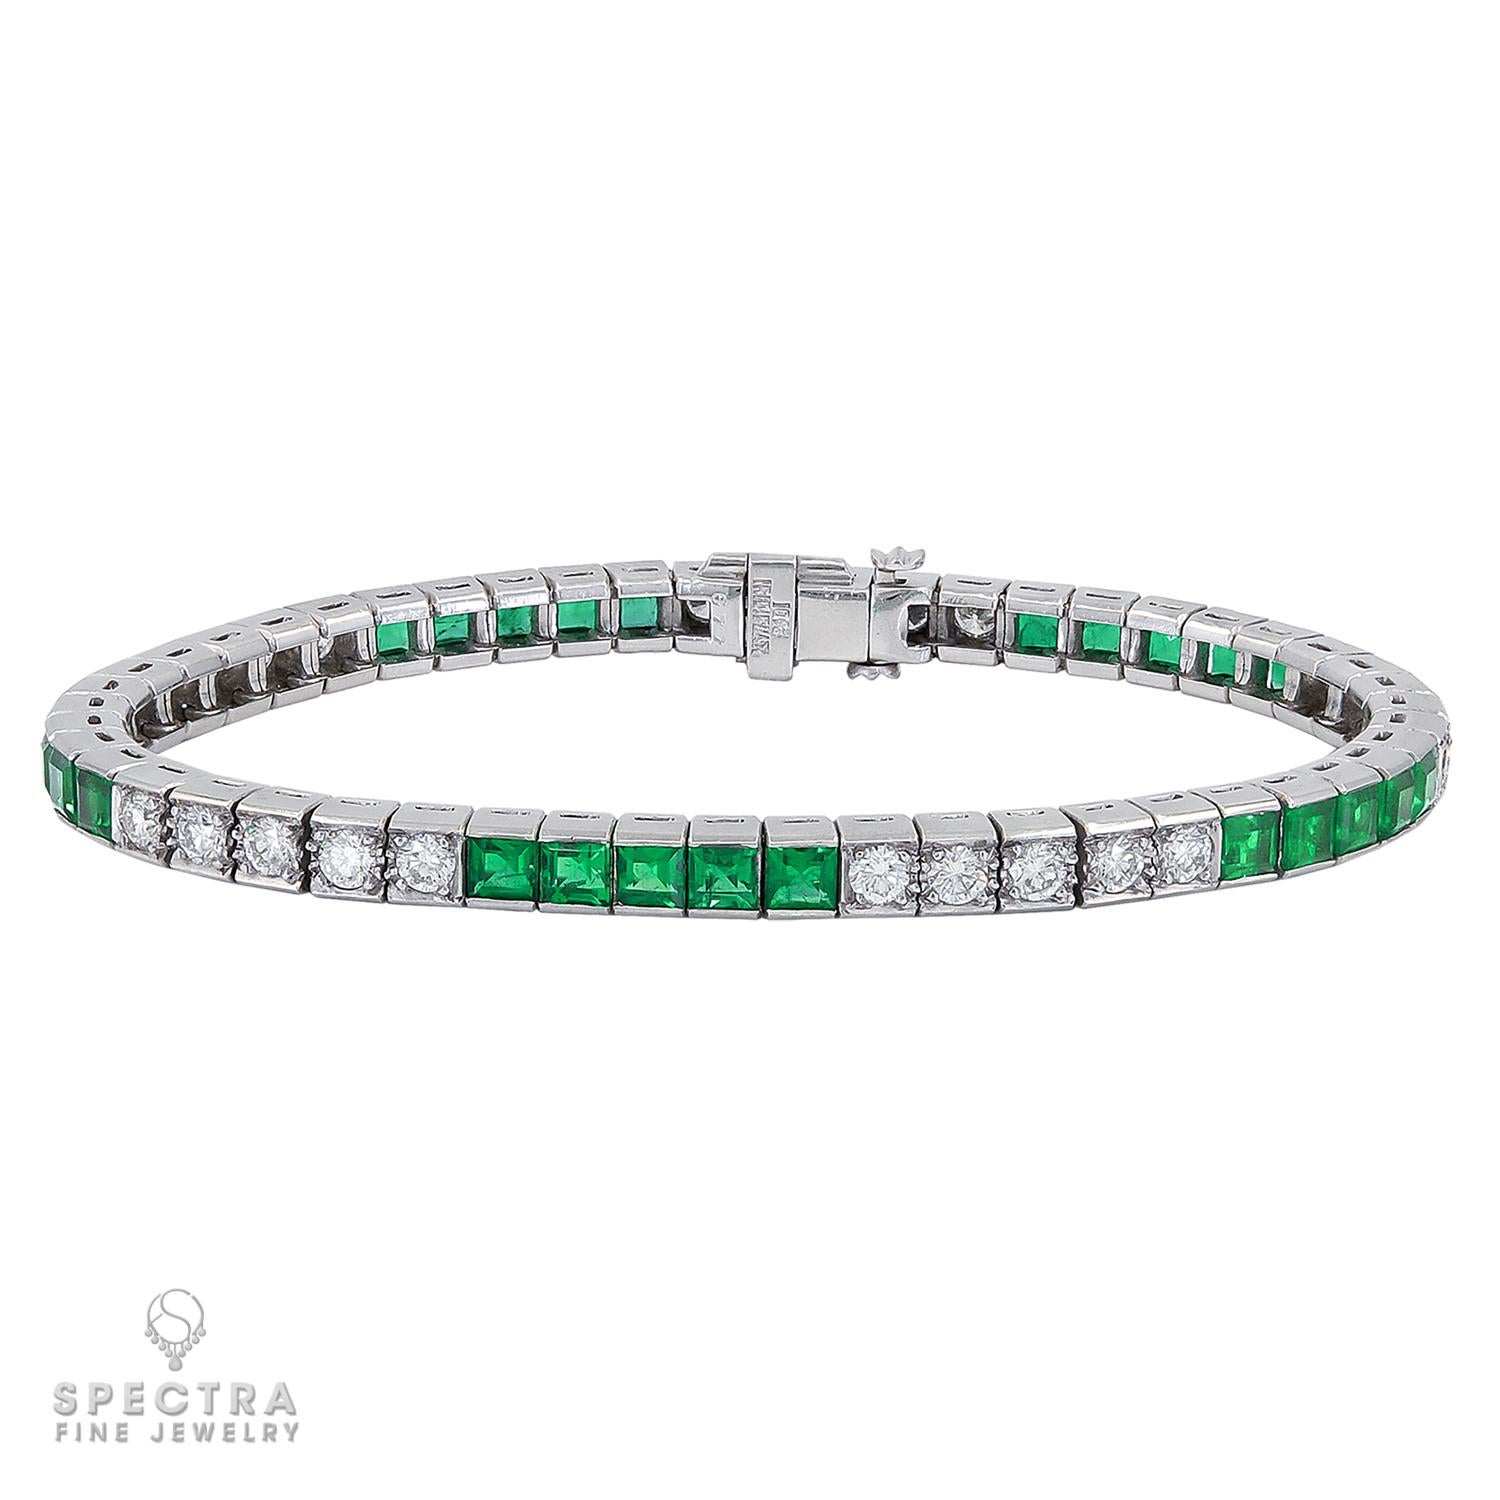 This elegant line bracelet will have you invoking your inner Daisy Buchanan excited to get ready for an extravagant soiree at the Gatsby mansion. Line bracelets as they were known during the 1920s when they first appeared, were typically worn in